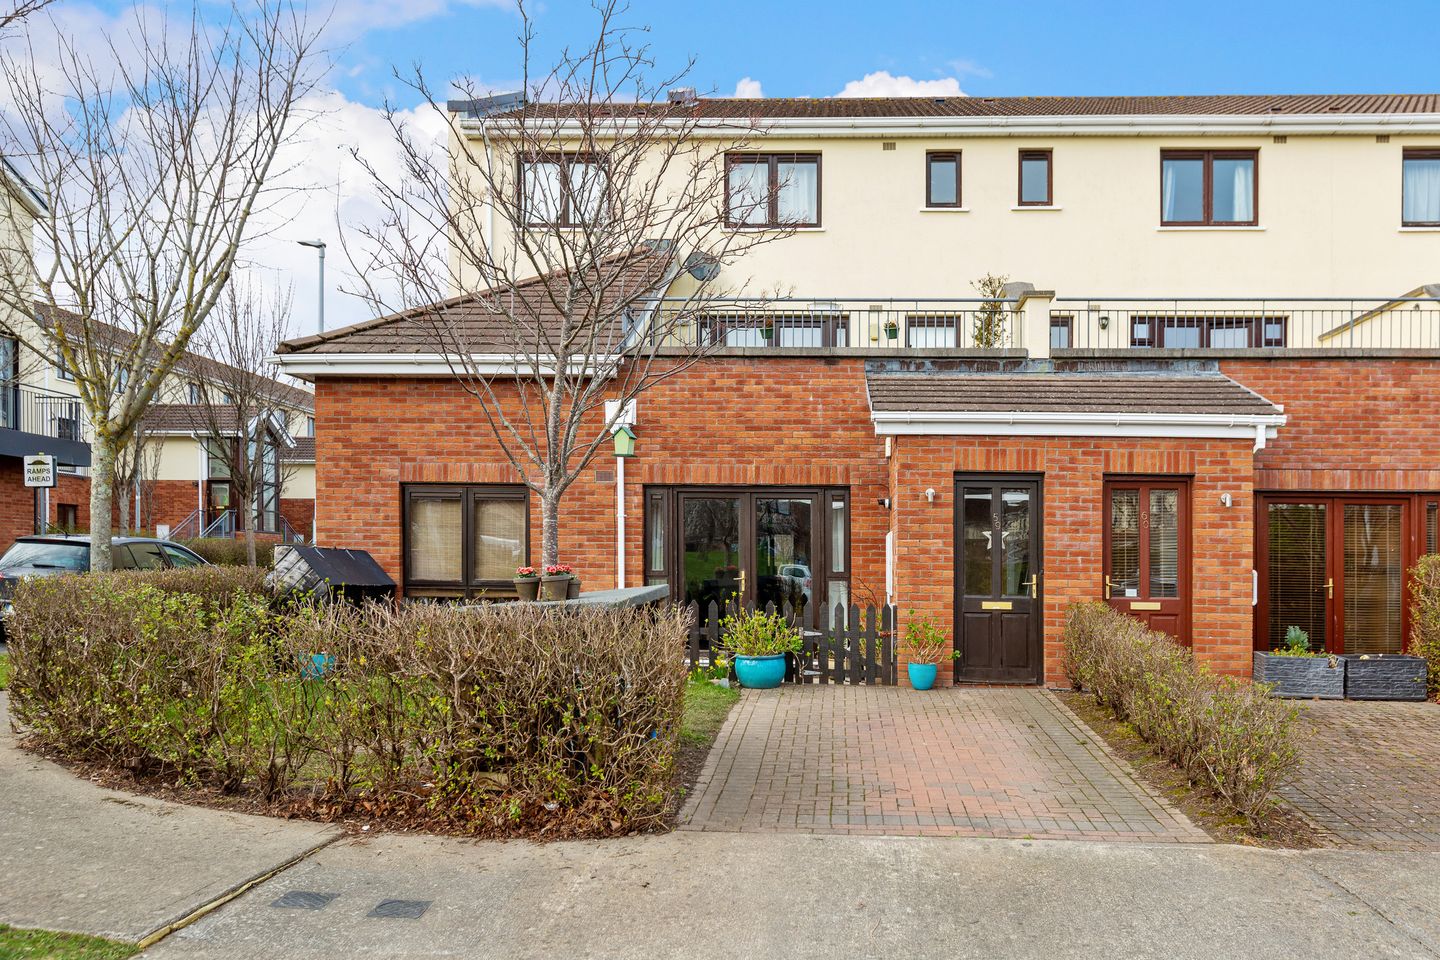 59 Charlesland Park, Greystones, Co. Wicklow, A63HH77